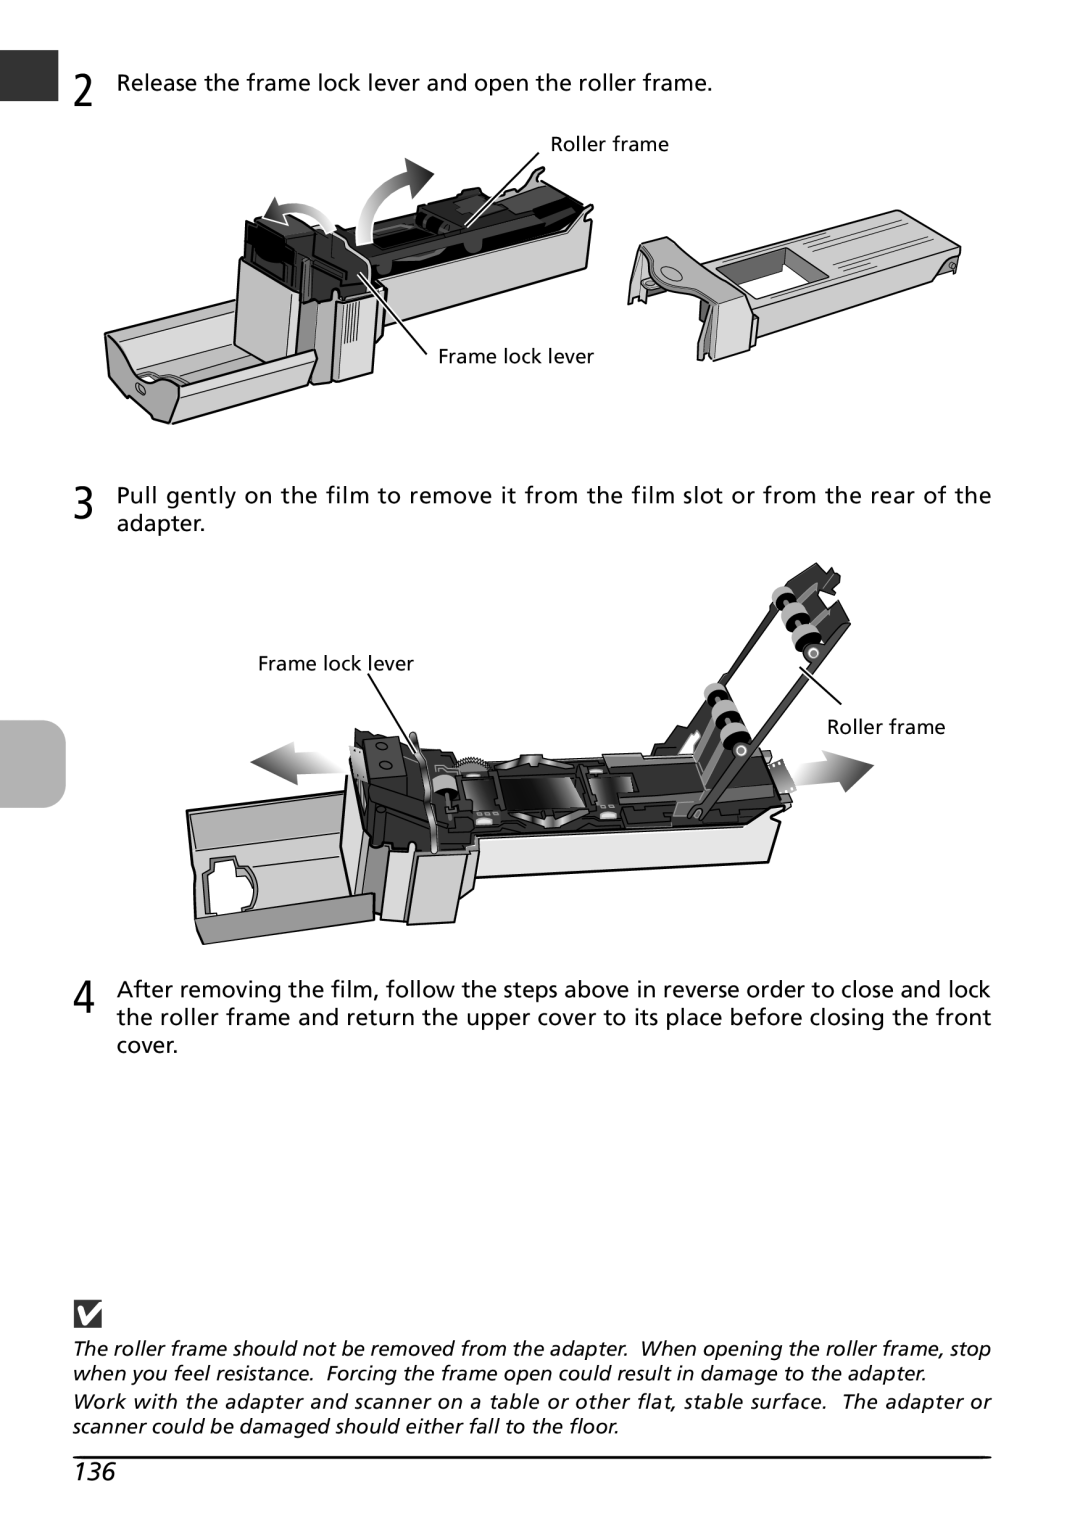 Nikon LS4000 user manual Release the frame lock lever and open the roller frame 